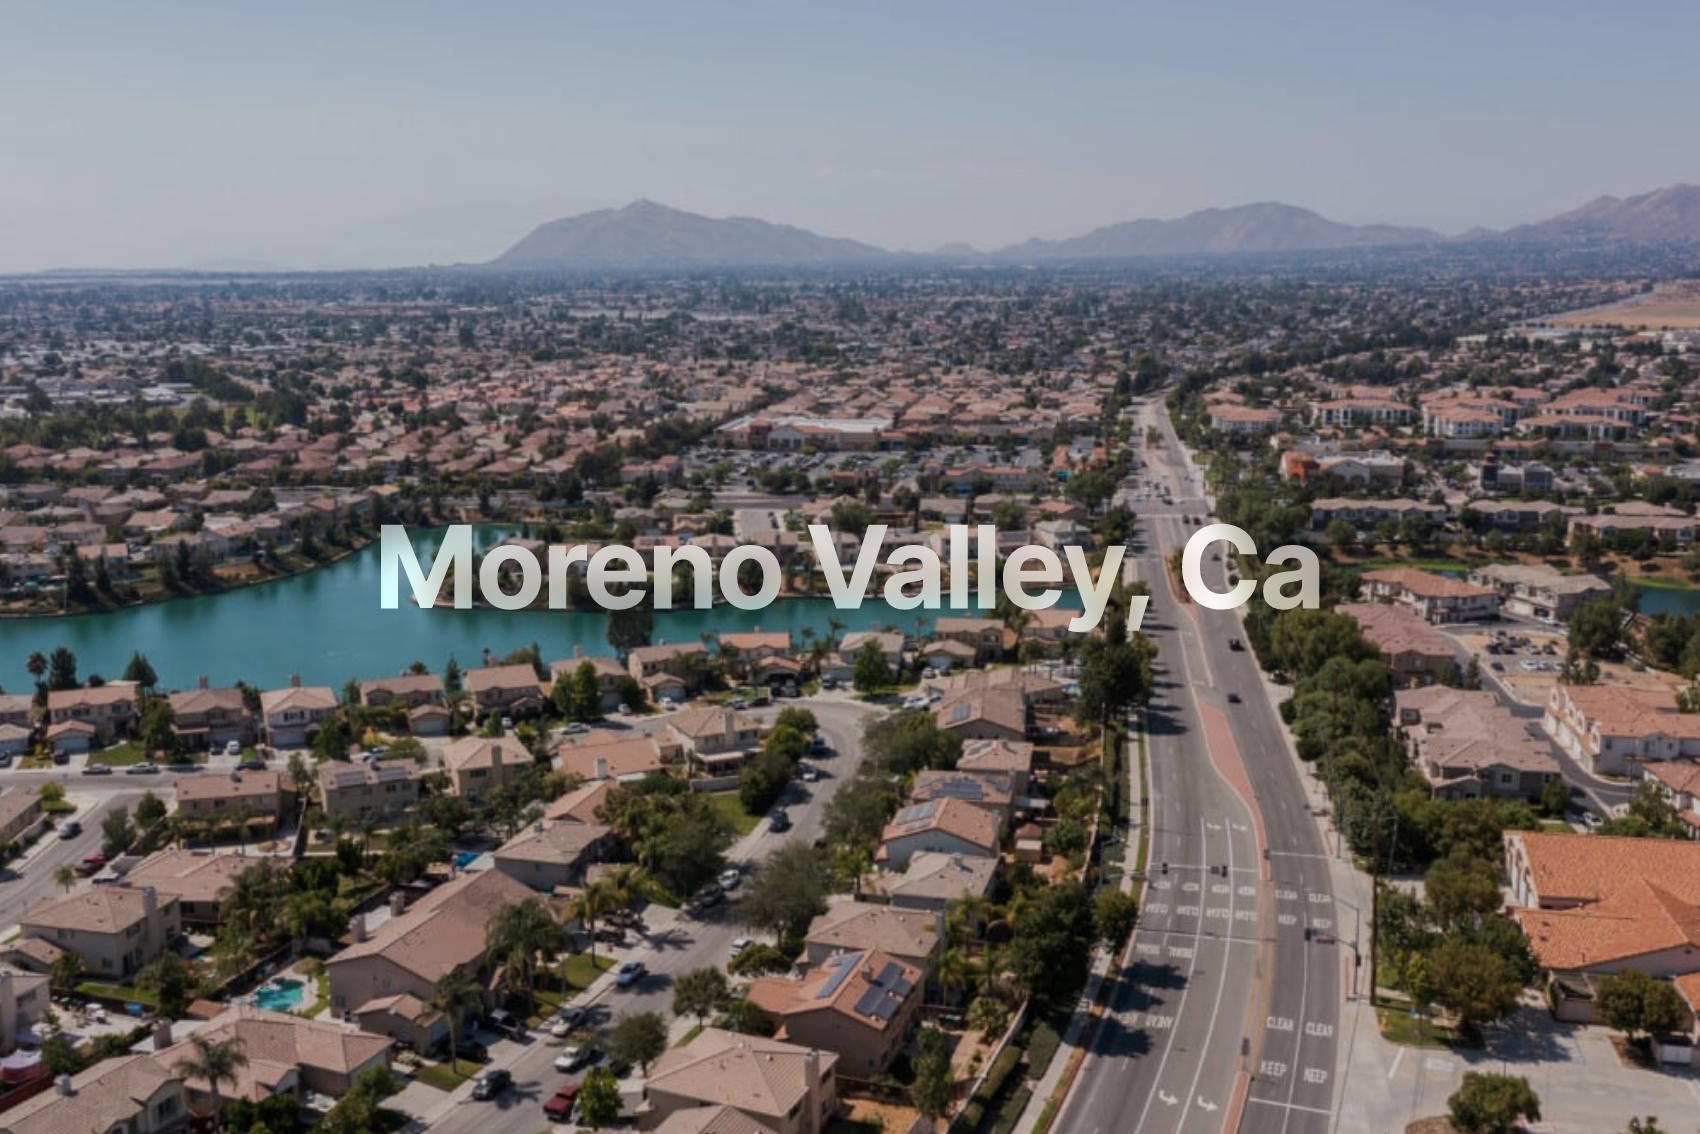 Image of the city of Moreno Valley, Ca